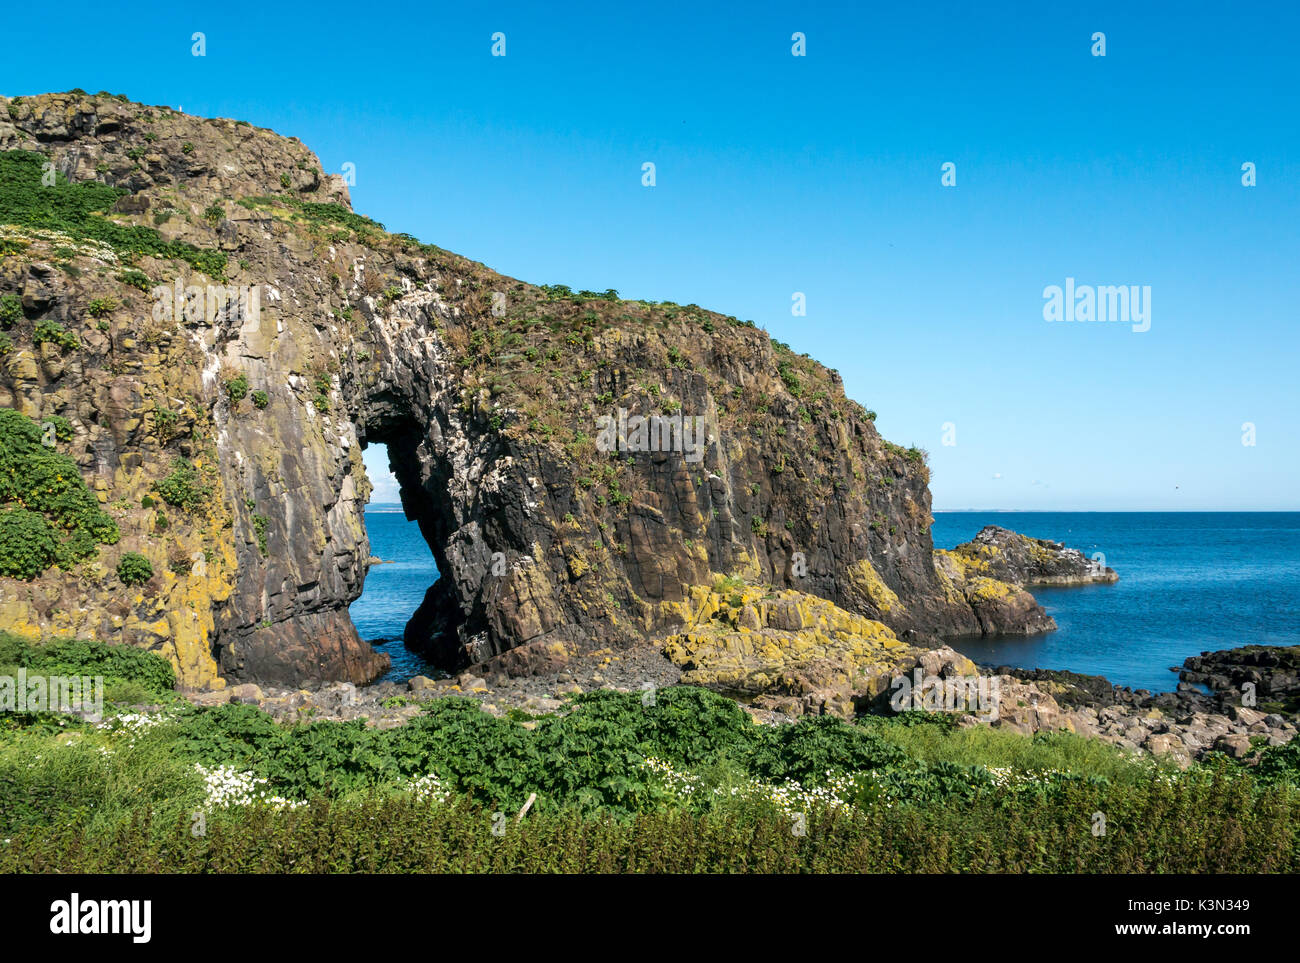 Looking through a natural sea worn arch called the ‘lady in the veil’, Fidra Island, Firth of Forth Scotland UK on a sunny day with blue sky Stock Photo